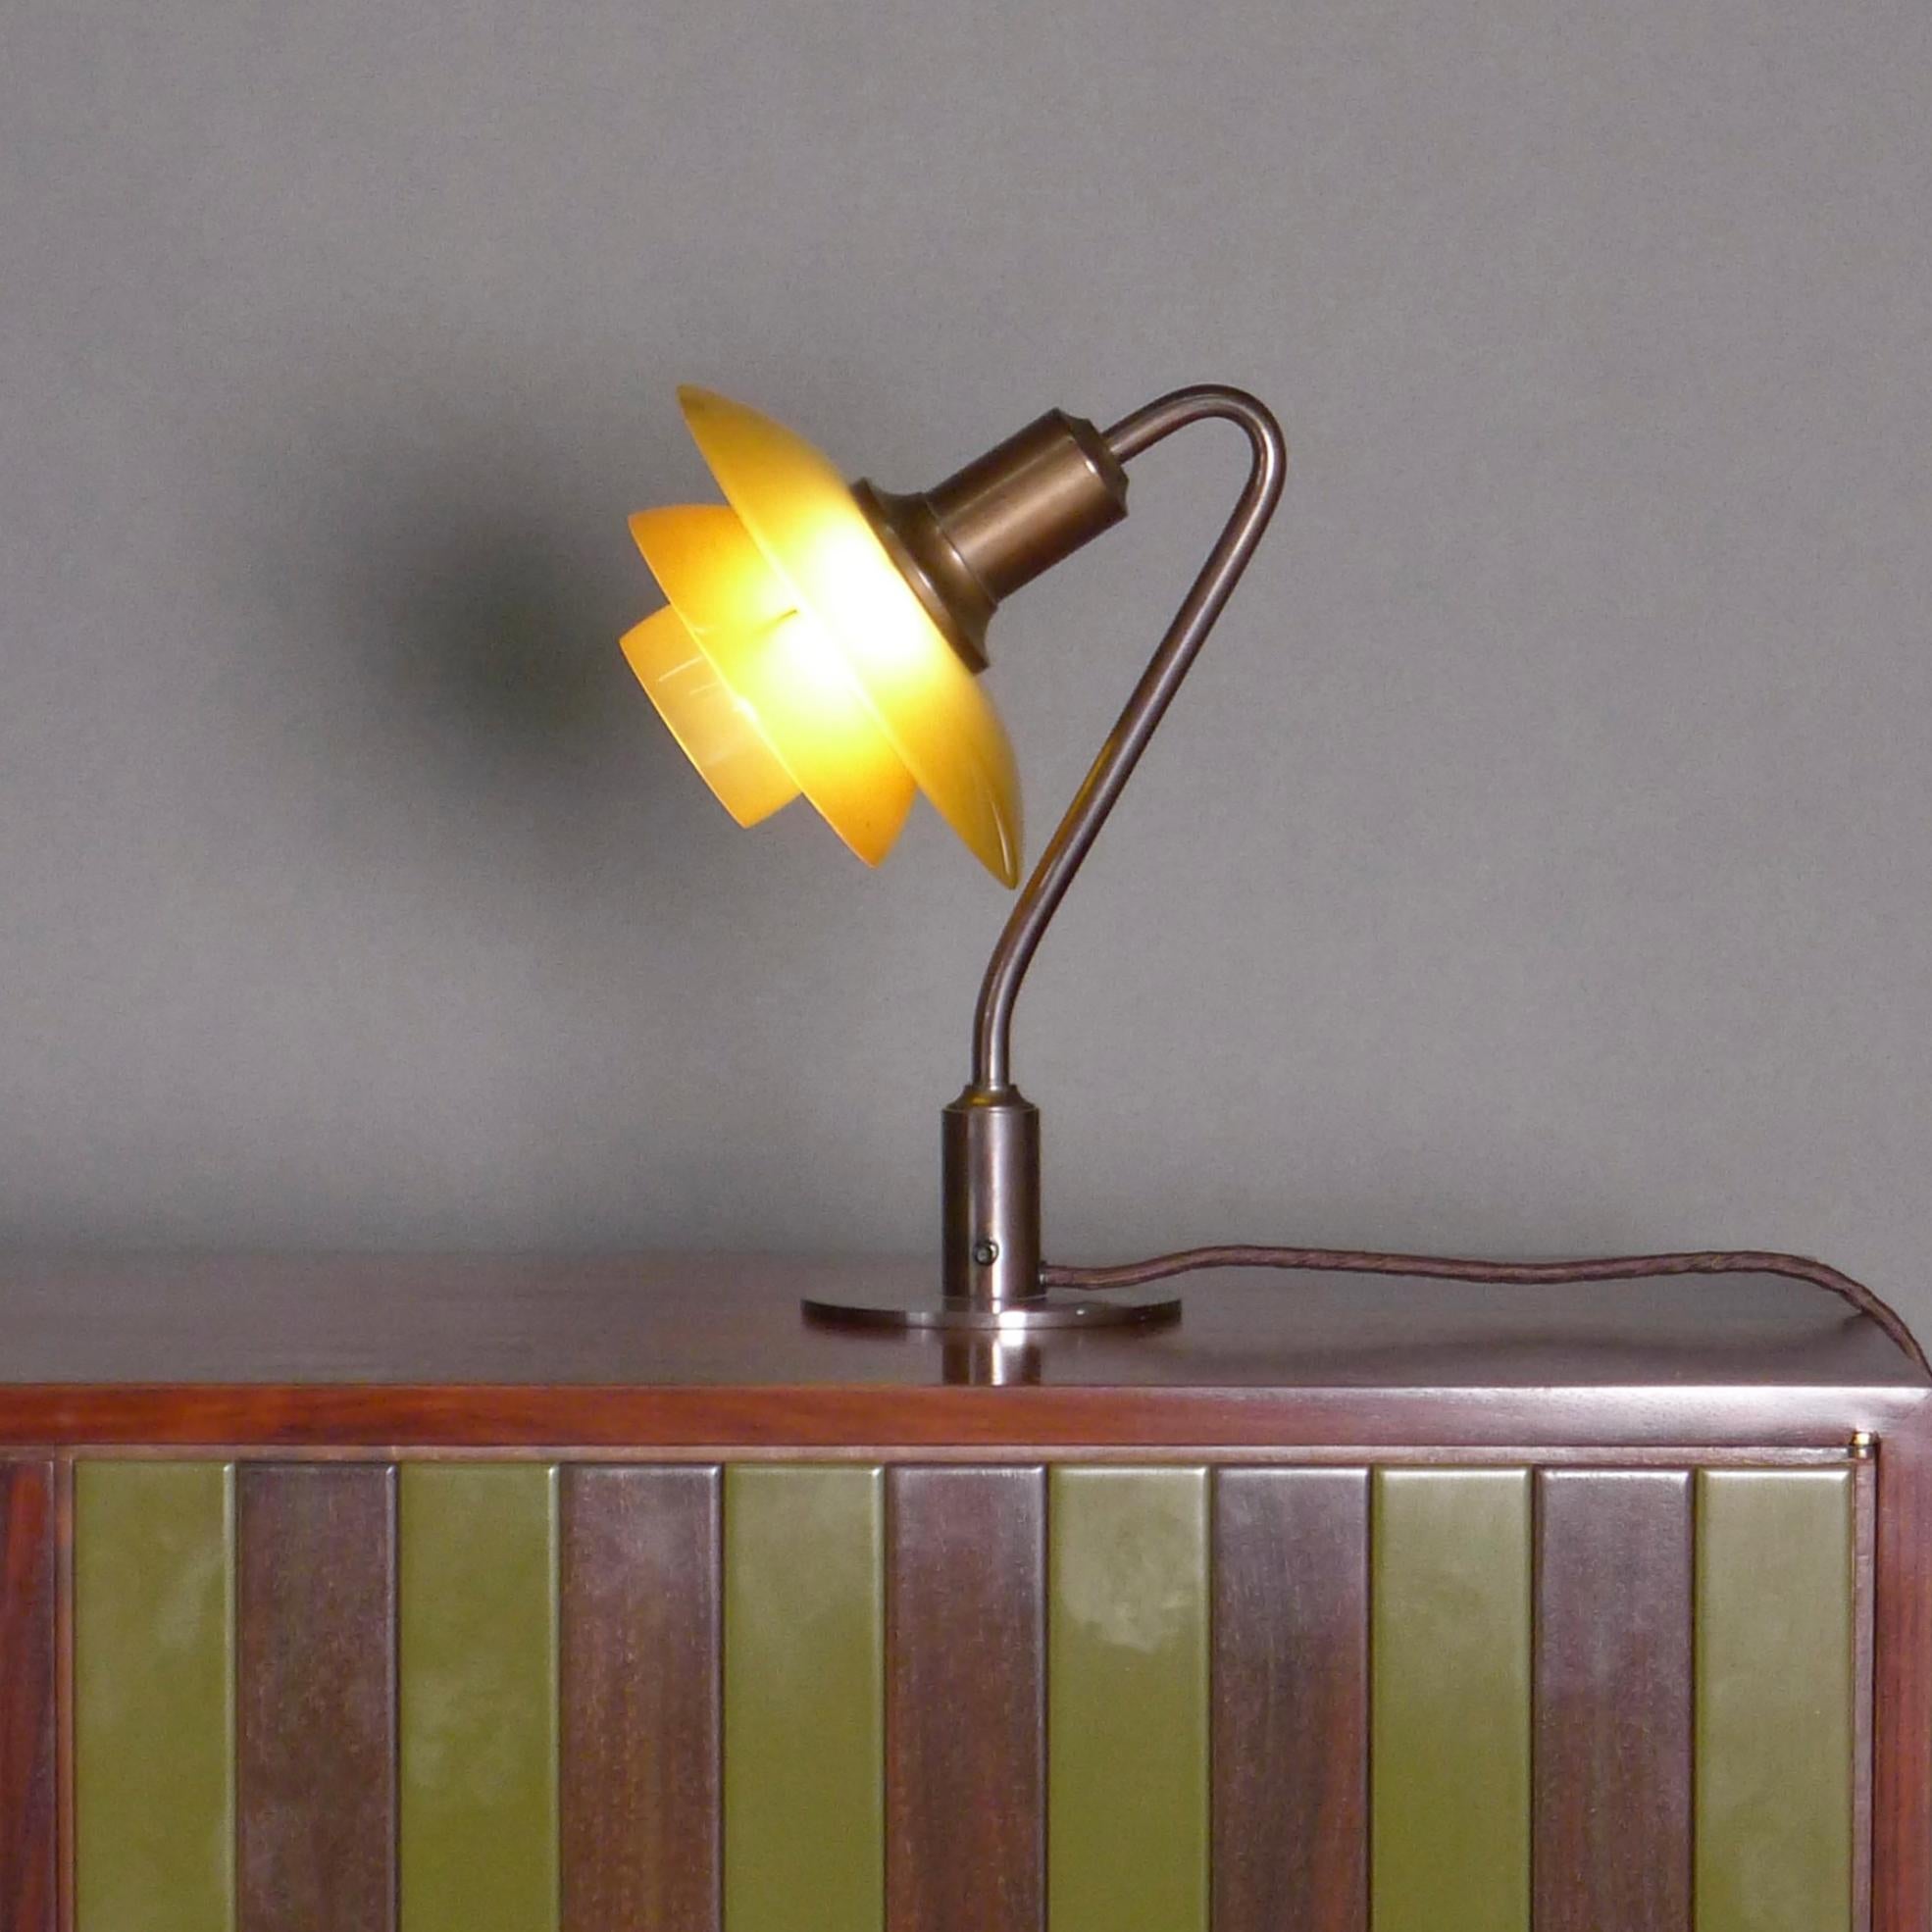 Poul Henningsen (1894-1967)
Miniature Table Lamp, Model 2/2
known as the ‘Vintergaekken' (Snowdrop) light
designed 1931 and produced 1931-1933 by Louis Poulsen, Denmark

Opaque amber glass shades, patinated brass stem and metal base with original